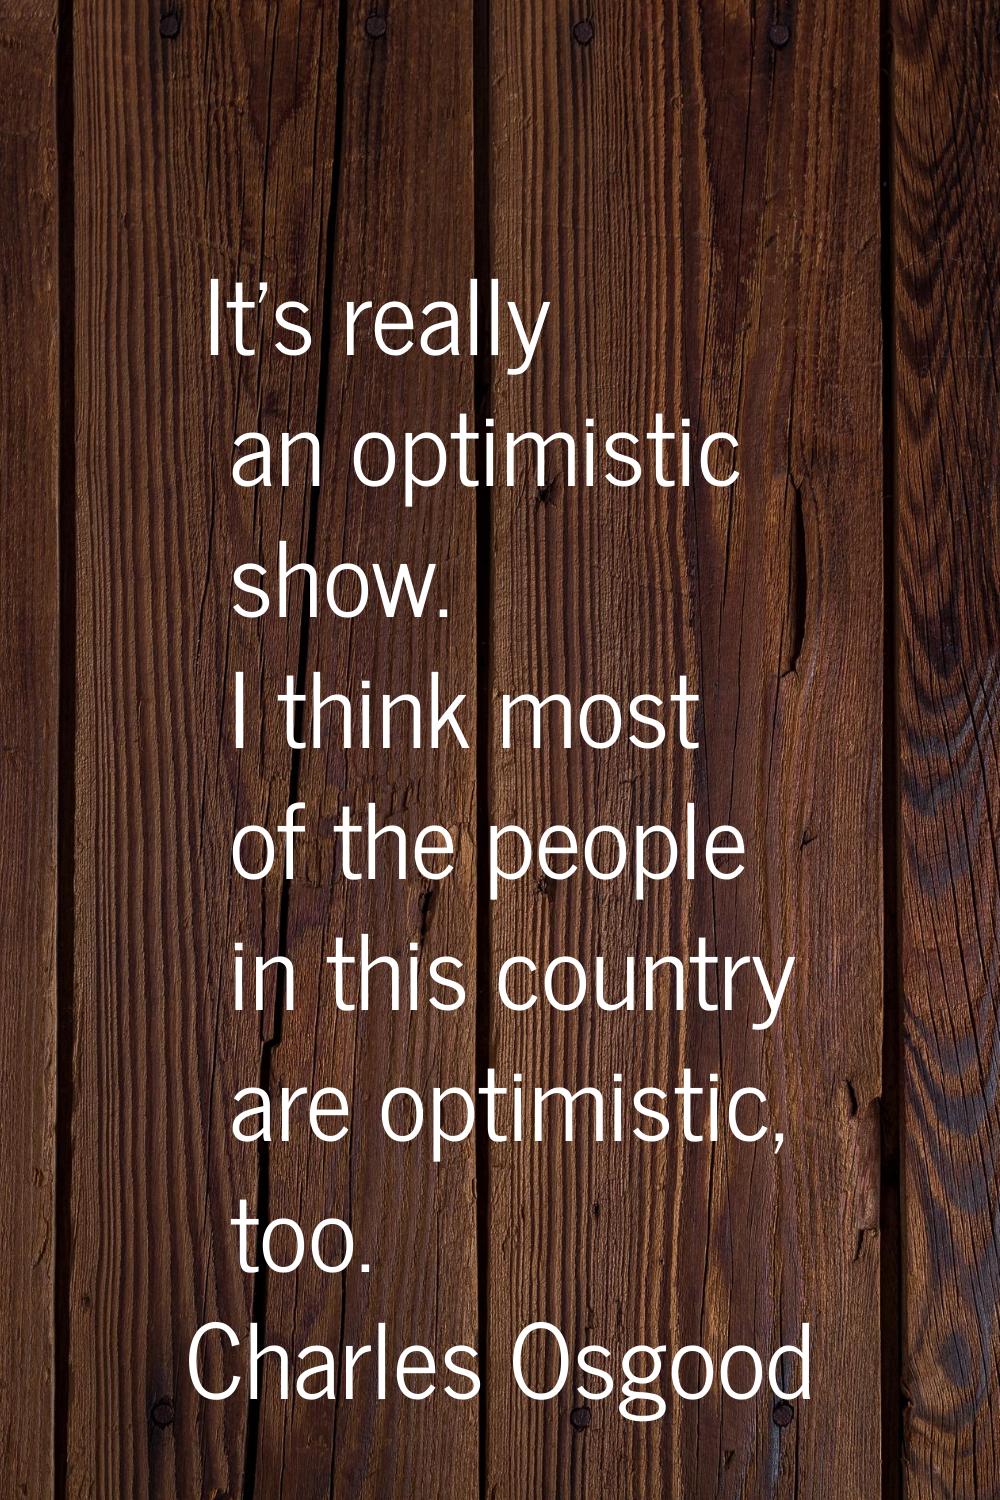 It's really an optimistic show. I think most of the people in this country are optimistic, too.